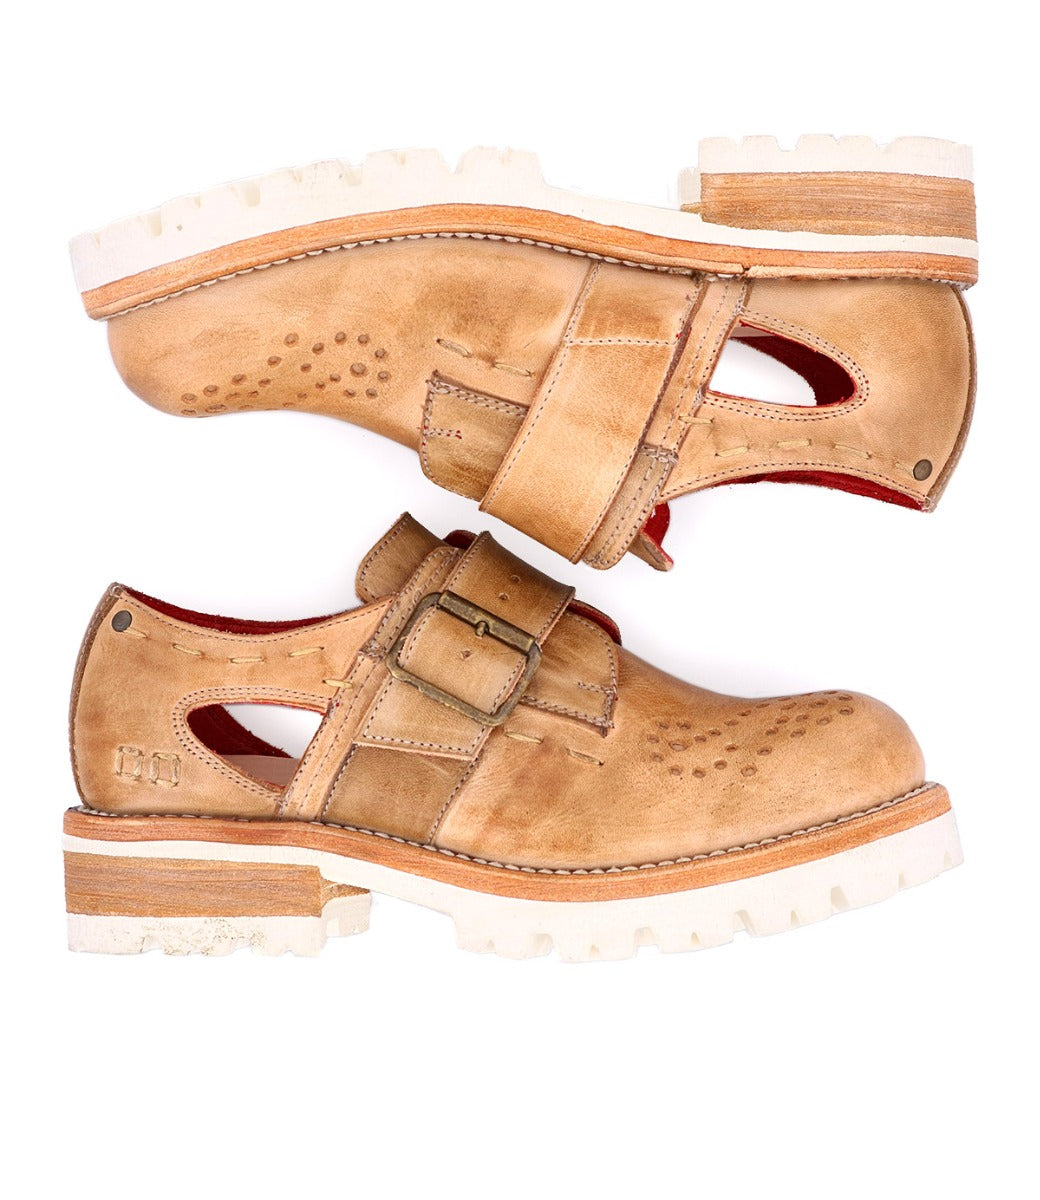 A pair of Bed Stu Dagny women’s tan leather shoes.